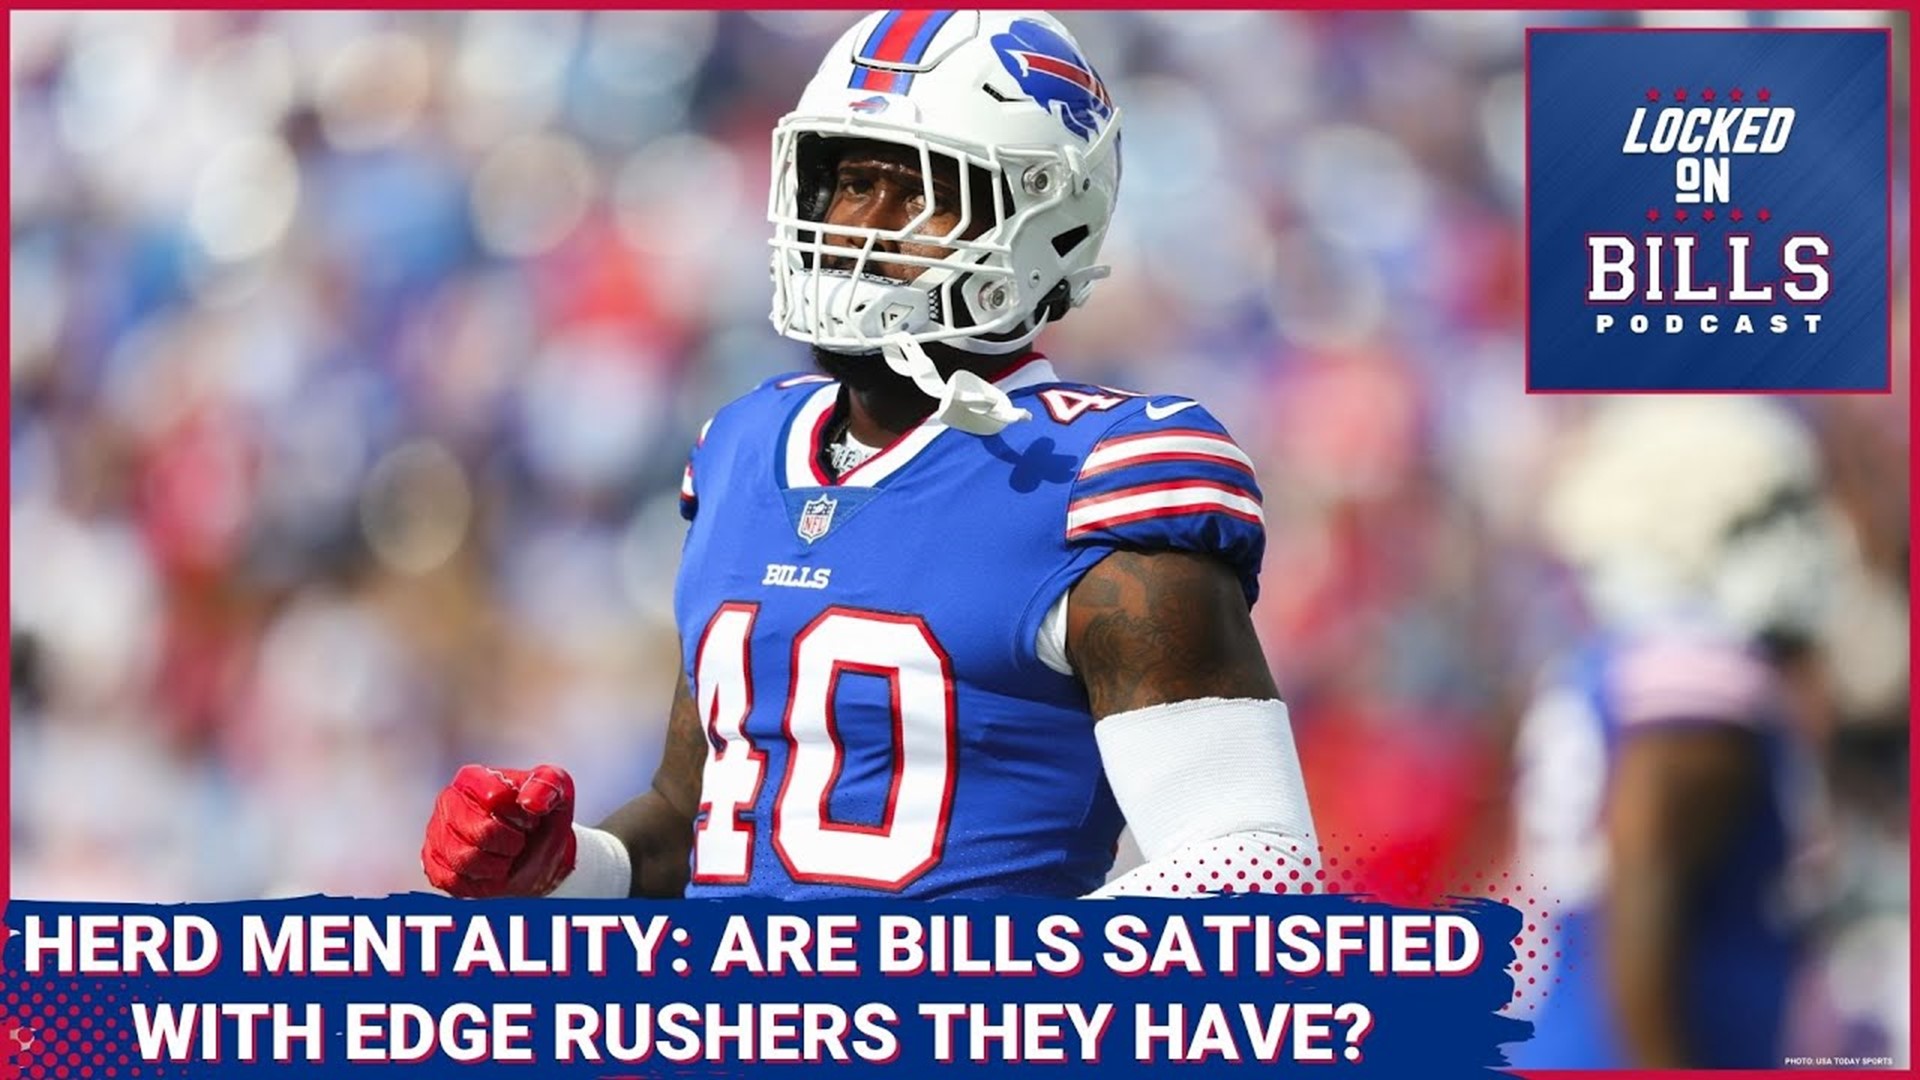 Does lack of moves indicate the Buffalo Bills are satisfied with current group of edge rushers?